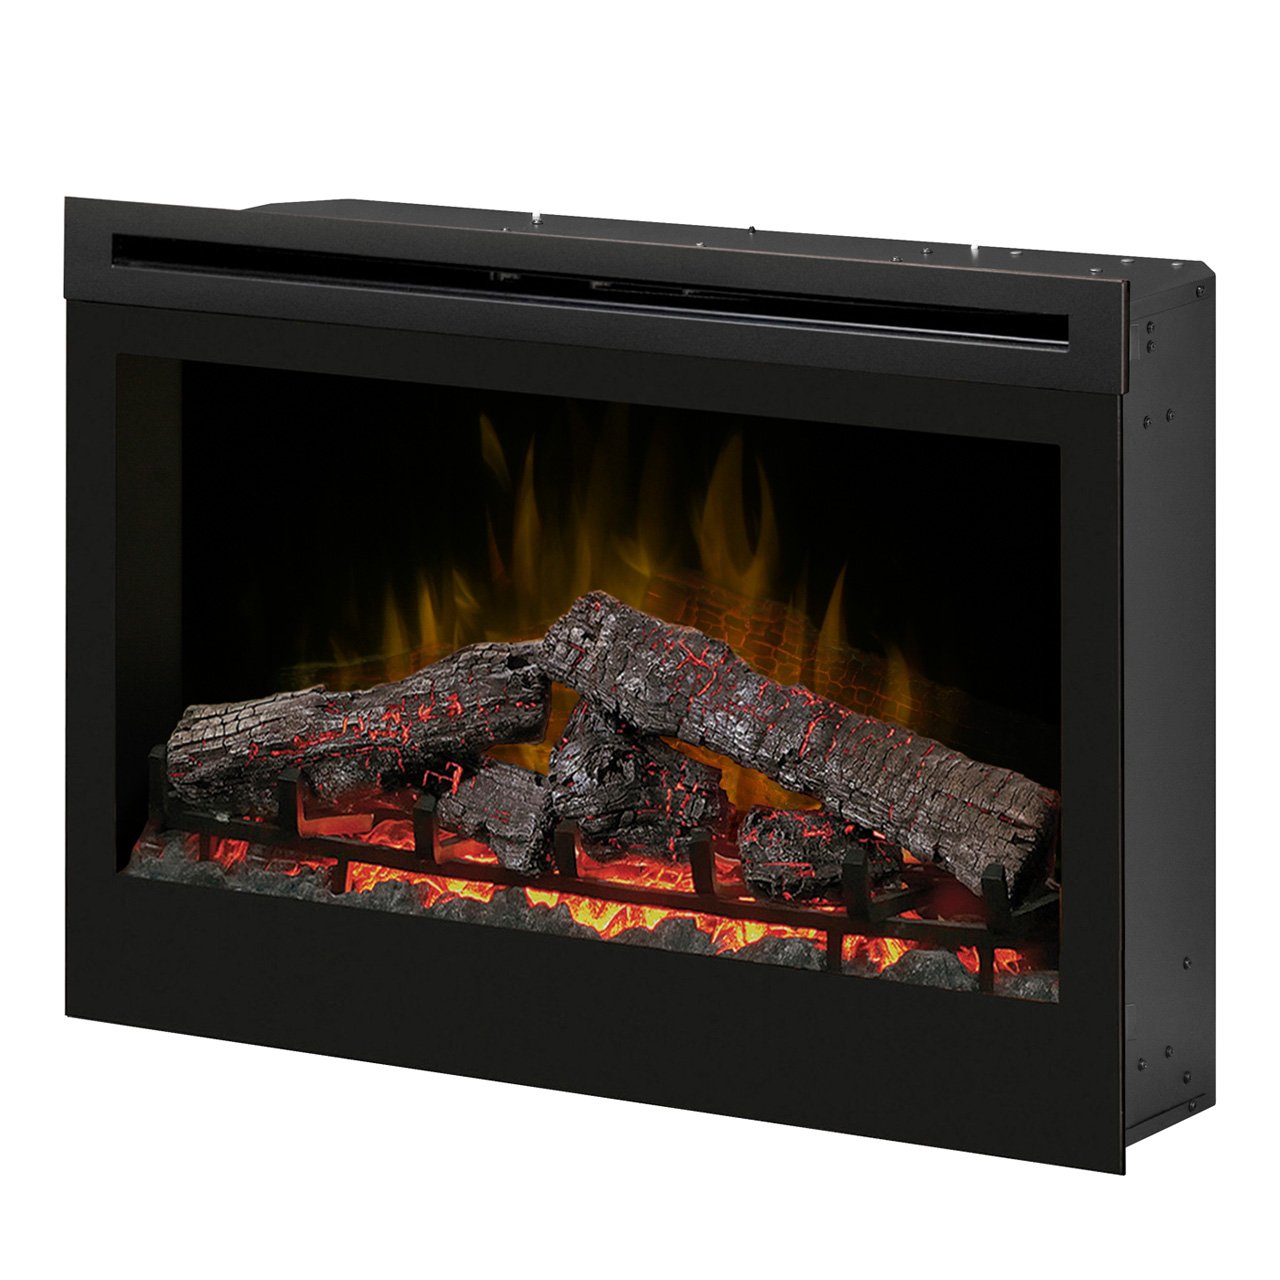 Fireplace and Tv Ideas Fresh Dimplex Df3033st 33 Inch Self Trimming Electric Fireplace Insert